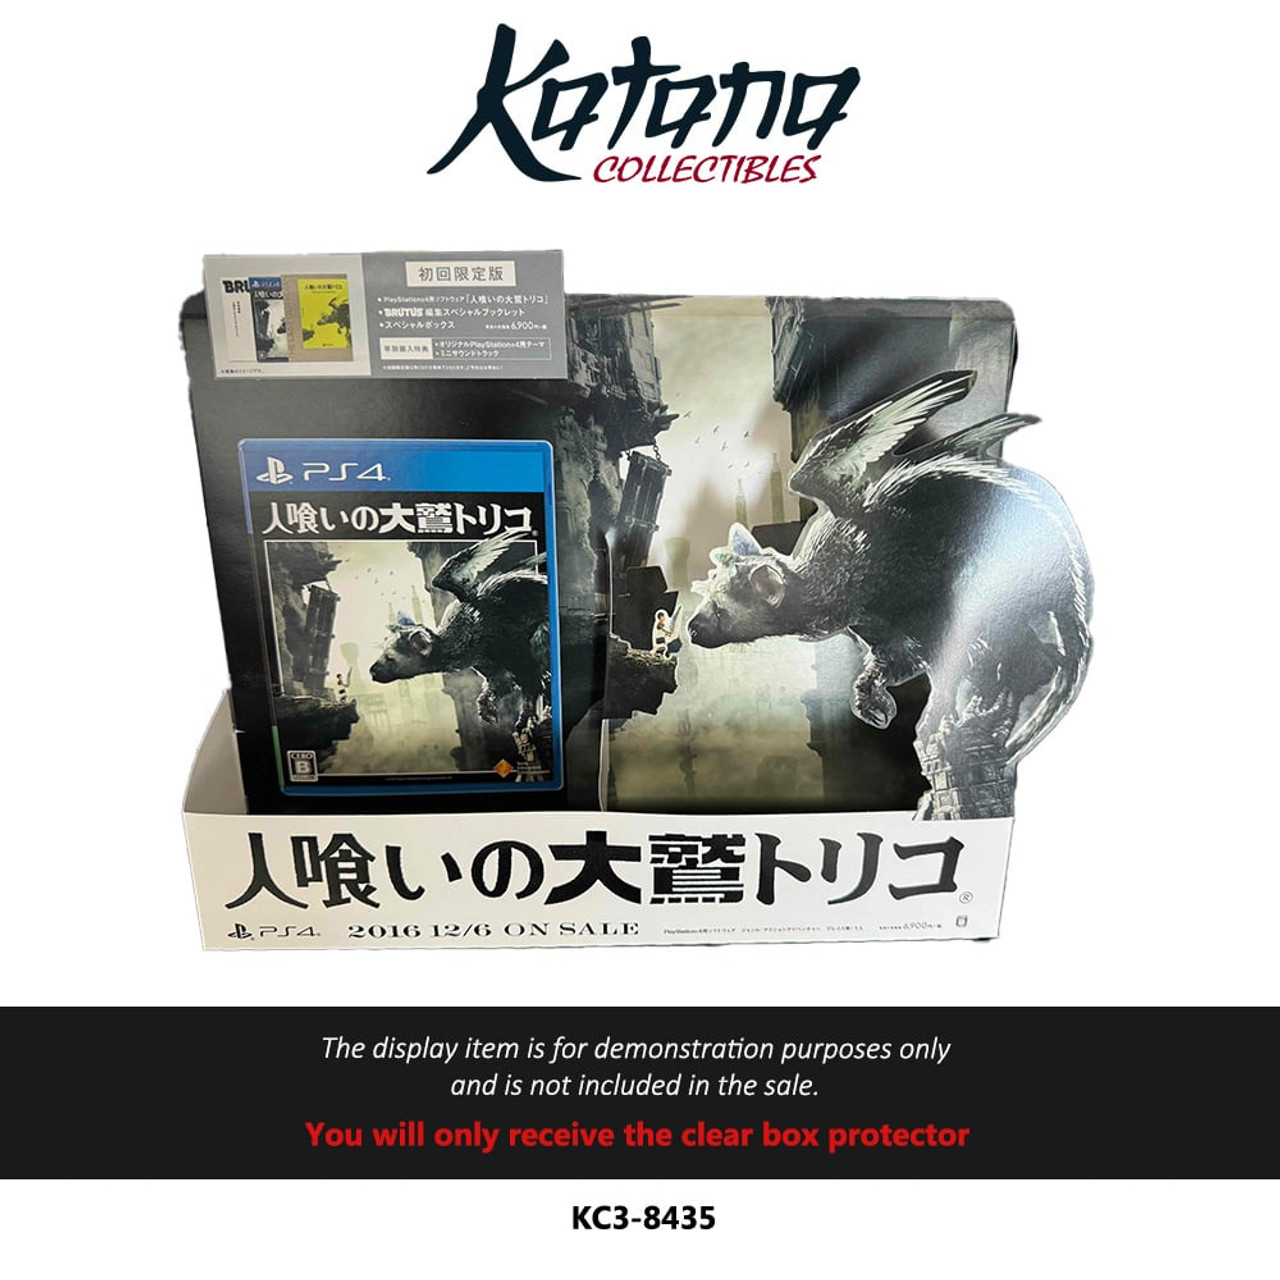 Katana Collectibles Protector For Last Guardian Japanese Store Display (Small)